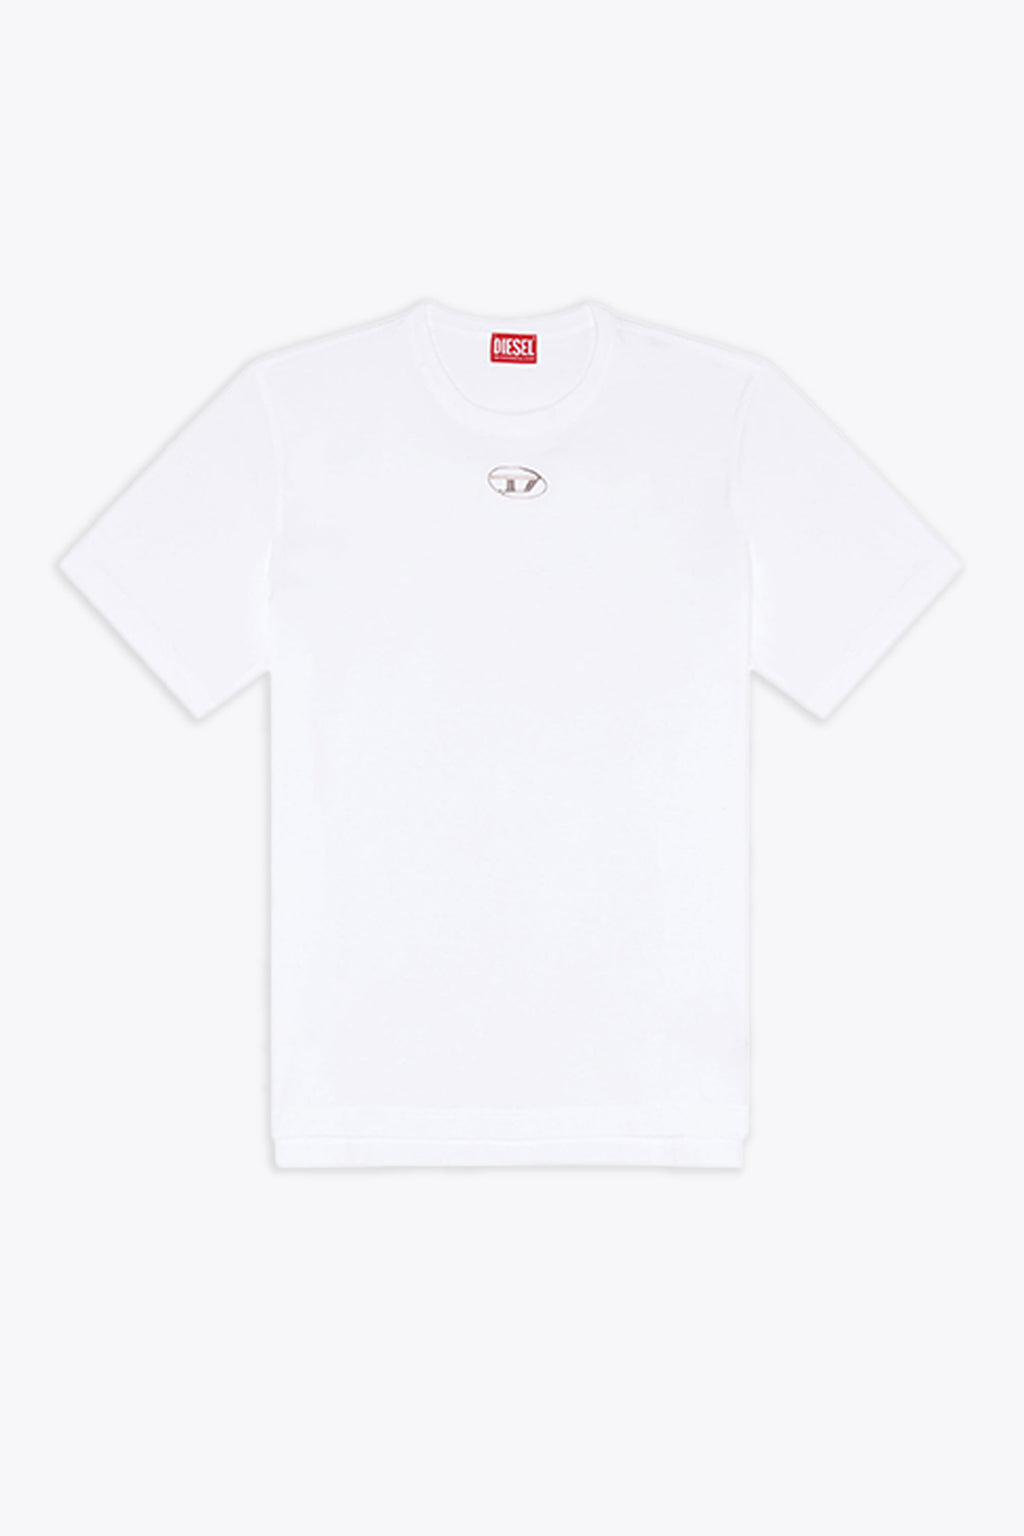 alt-image__White-cotton-t-shirt-with-Oval-D-rubber-logo---T-Just-Od